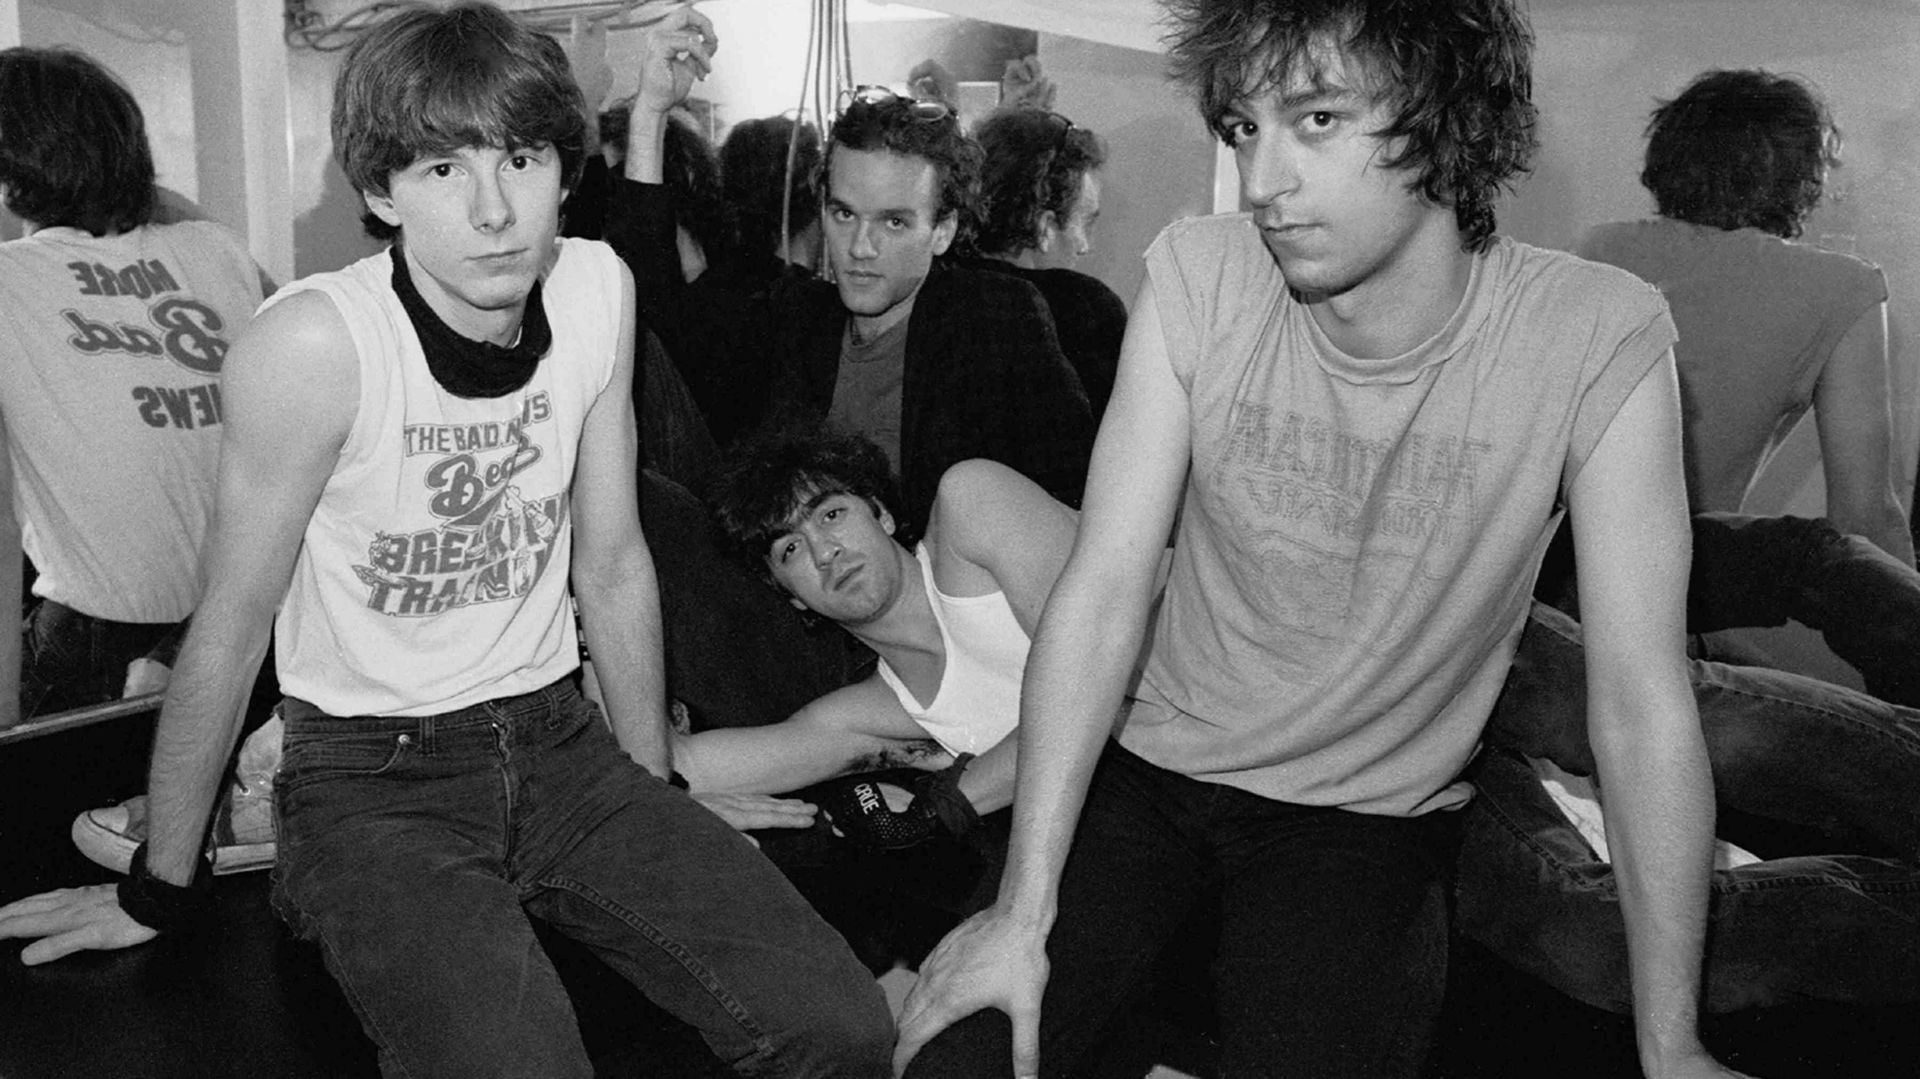 Photo of Michael STIPE and Mike MILLS and REM and Peter BUCK and Bill BERRY